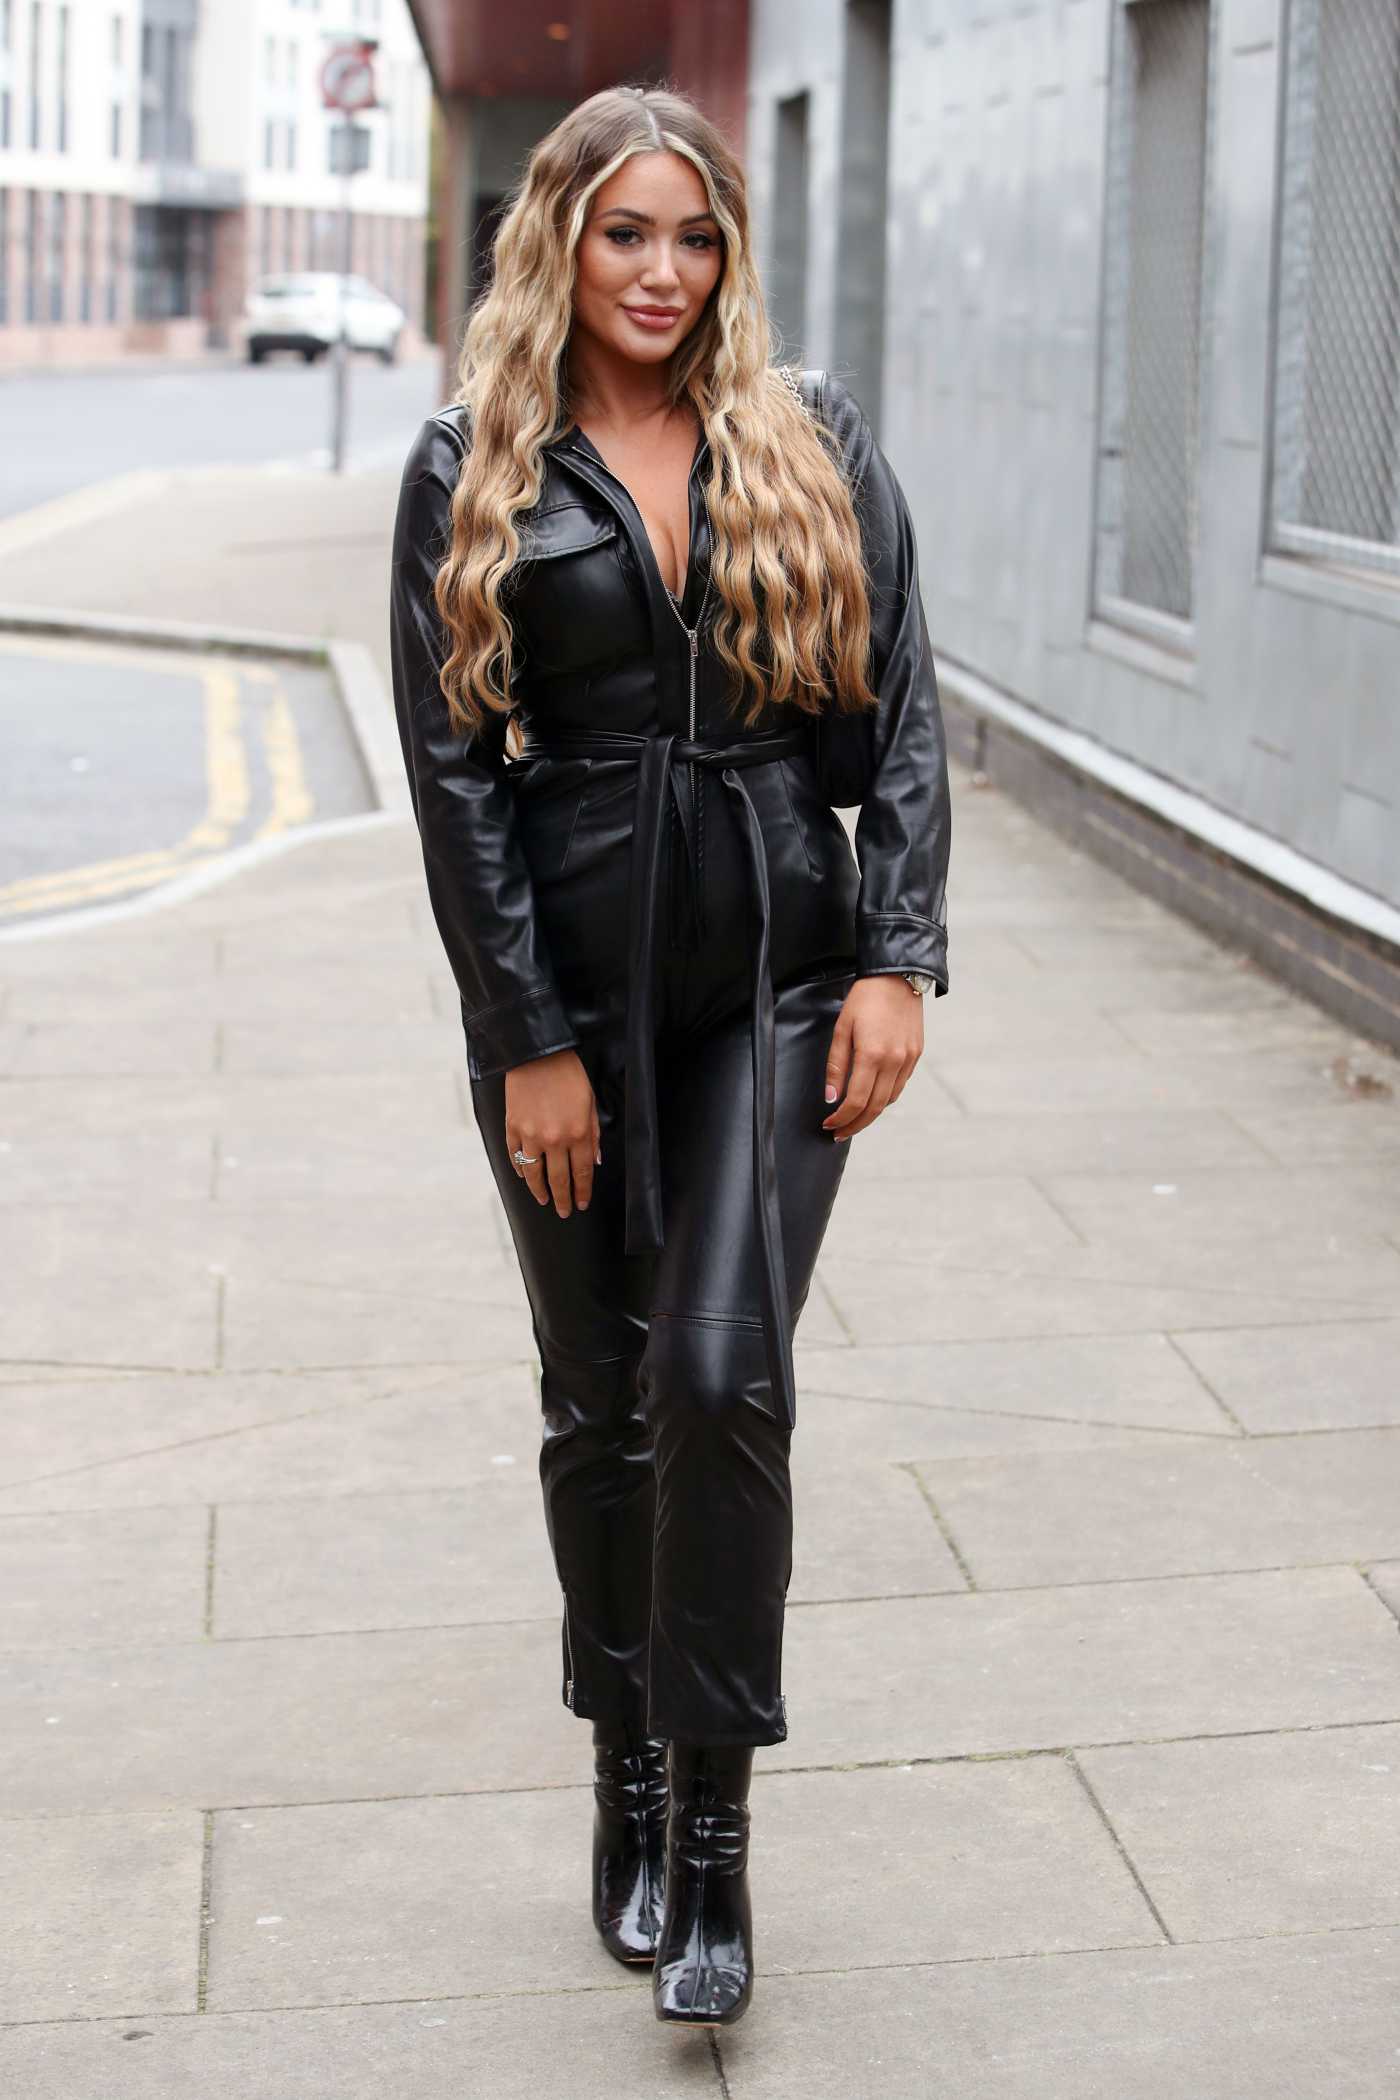 Frankie Sims in a Black Leather Jumpsuit on the Set of The Only Way is Essex TV Show in Essex 09/21/2020